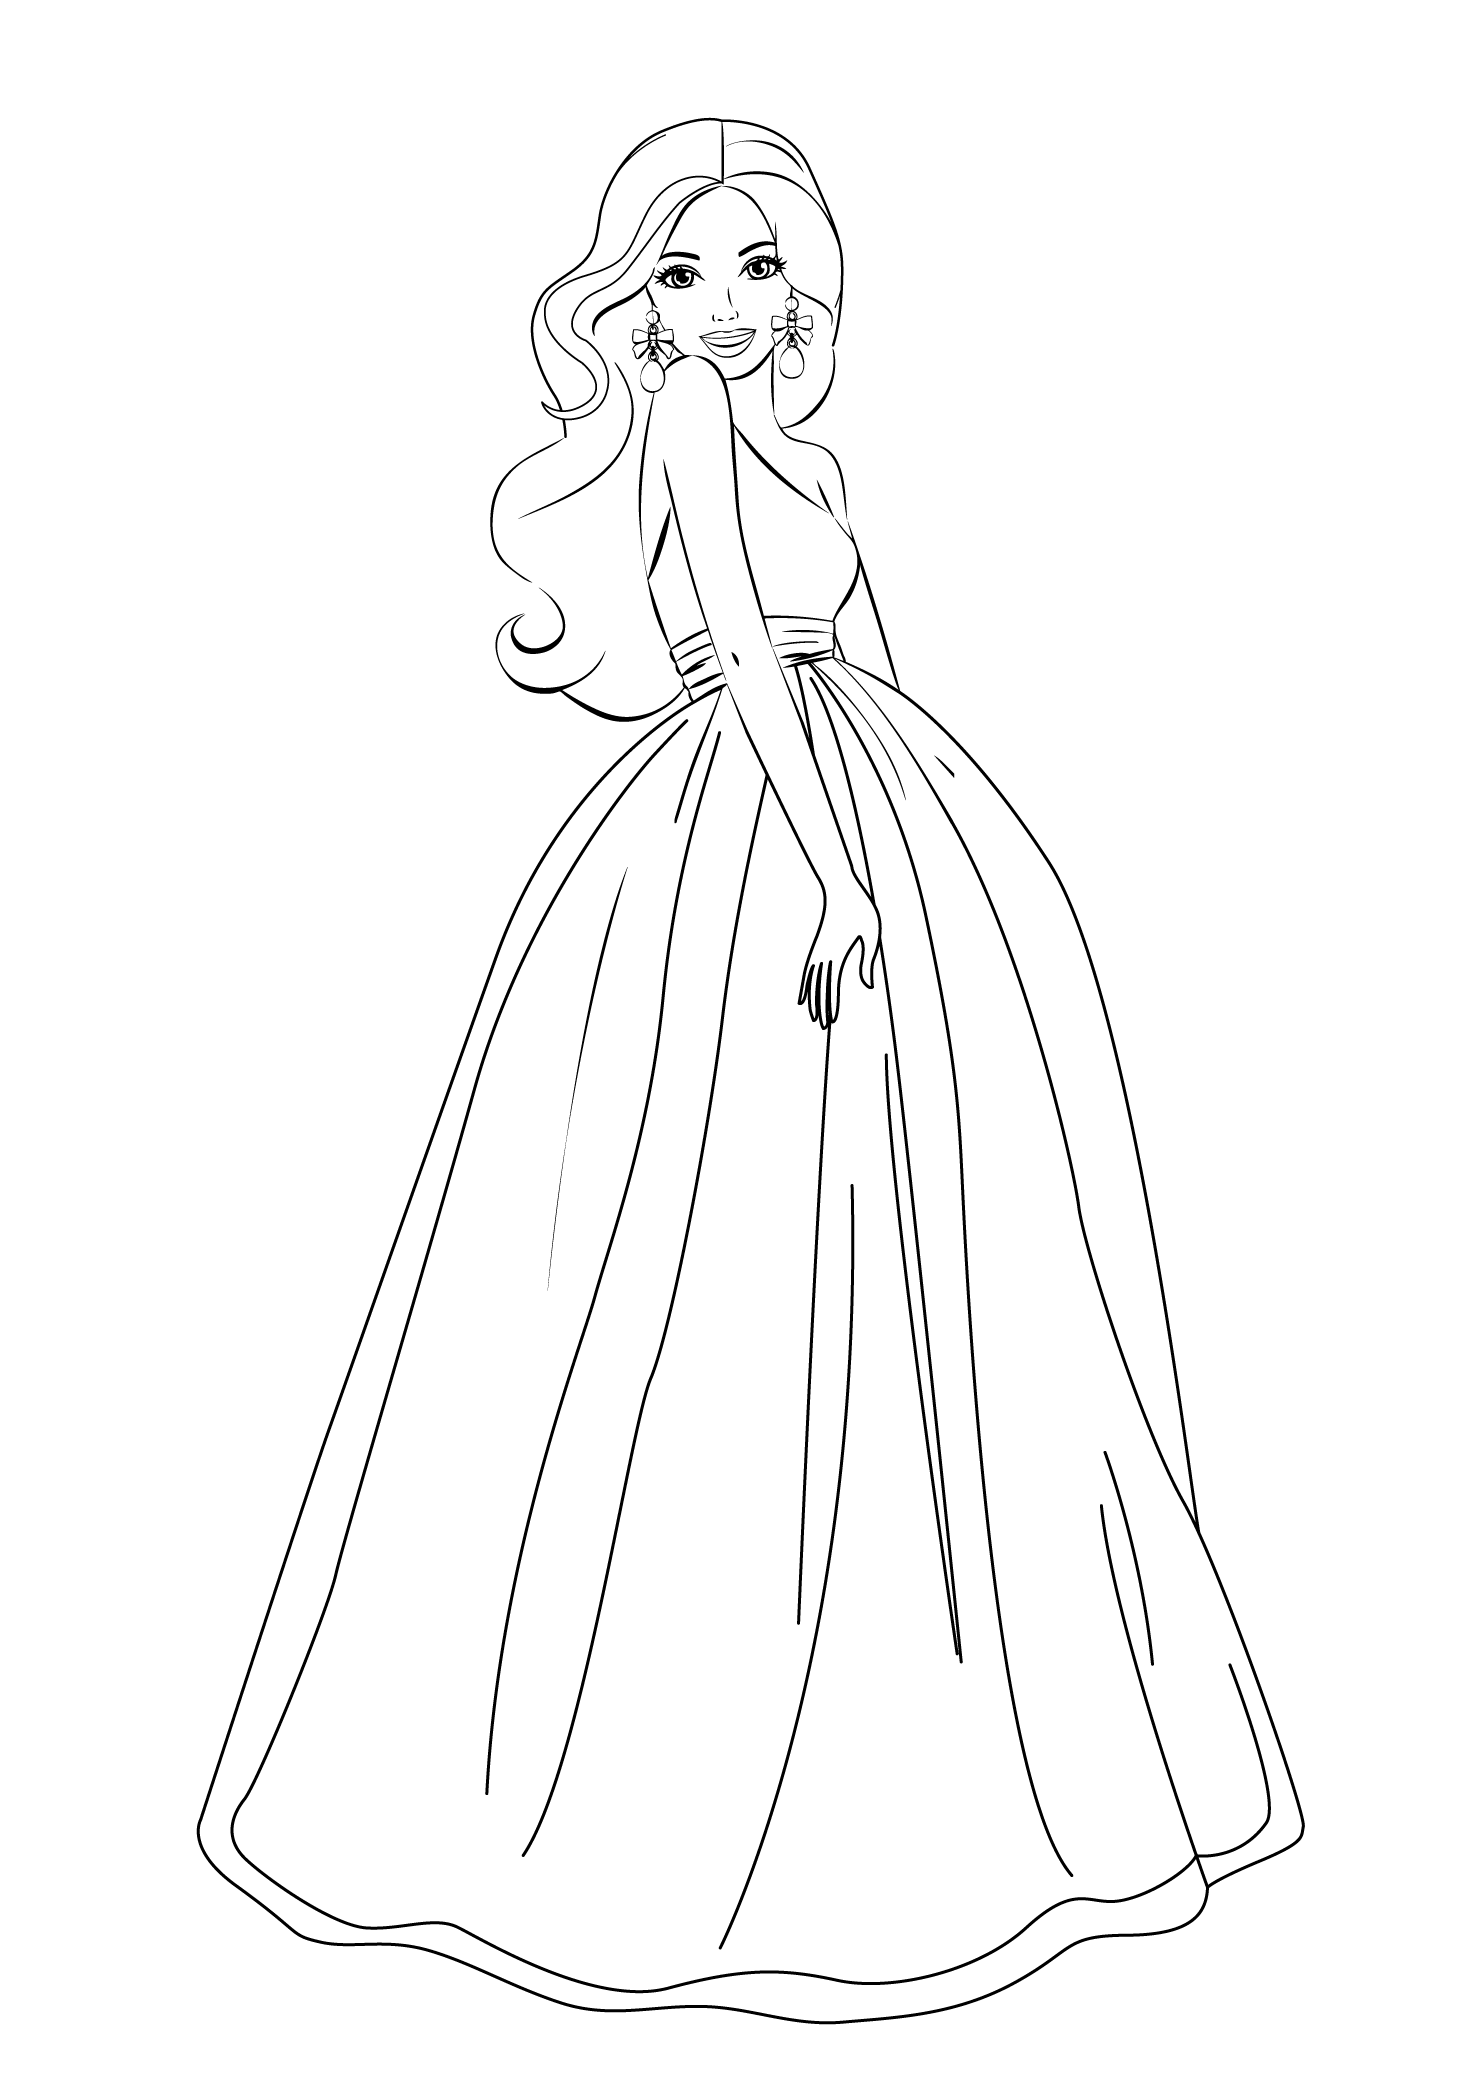 Barbie coloring pages for girls free printable